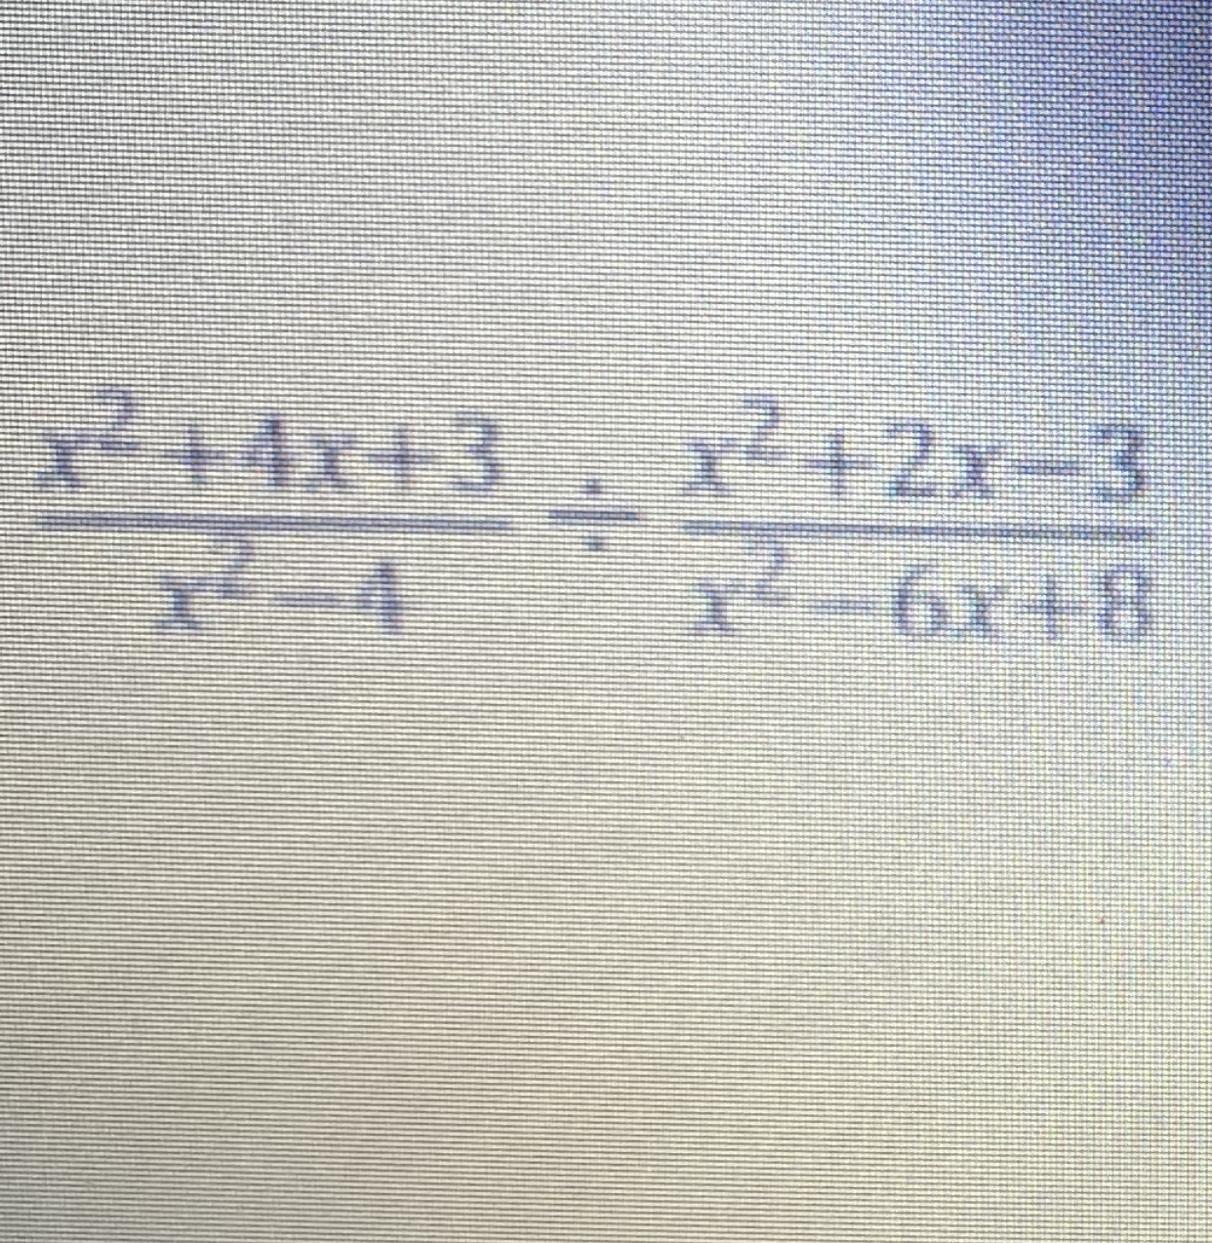 I Need Help On This EquationTo Simplify Each And State The Excluded Value.